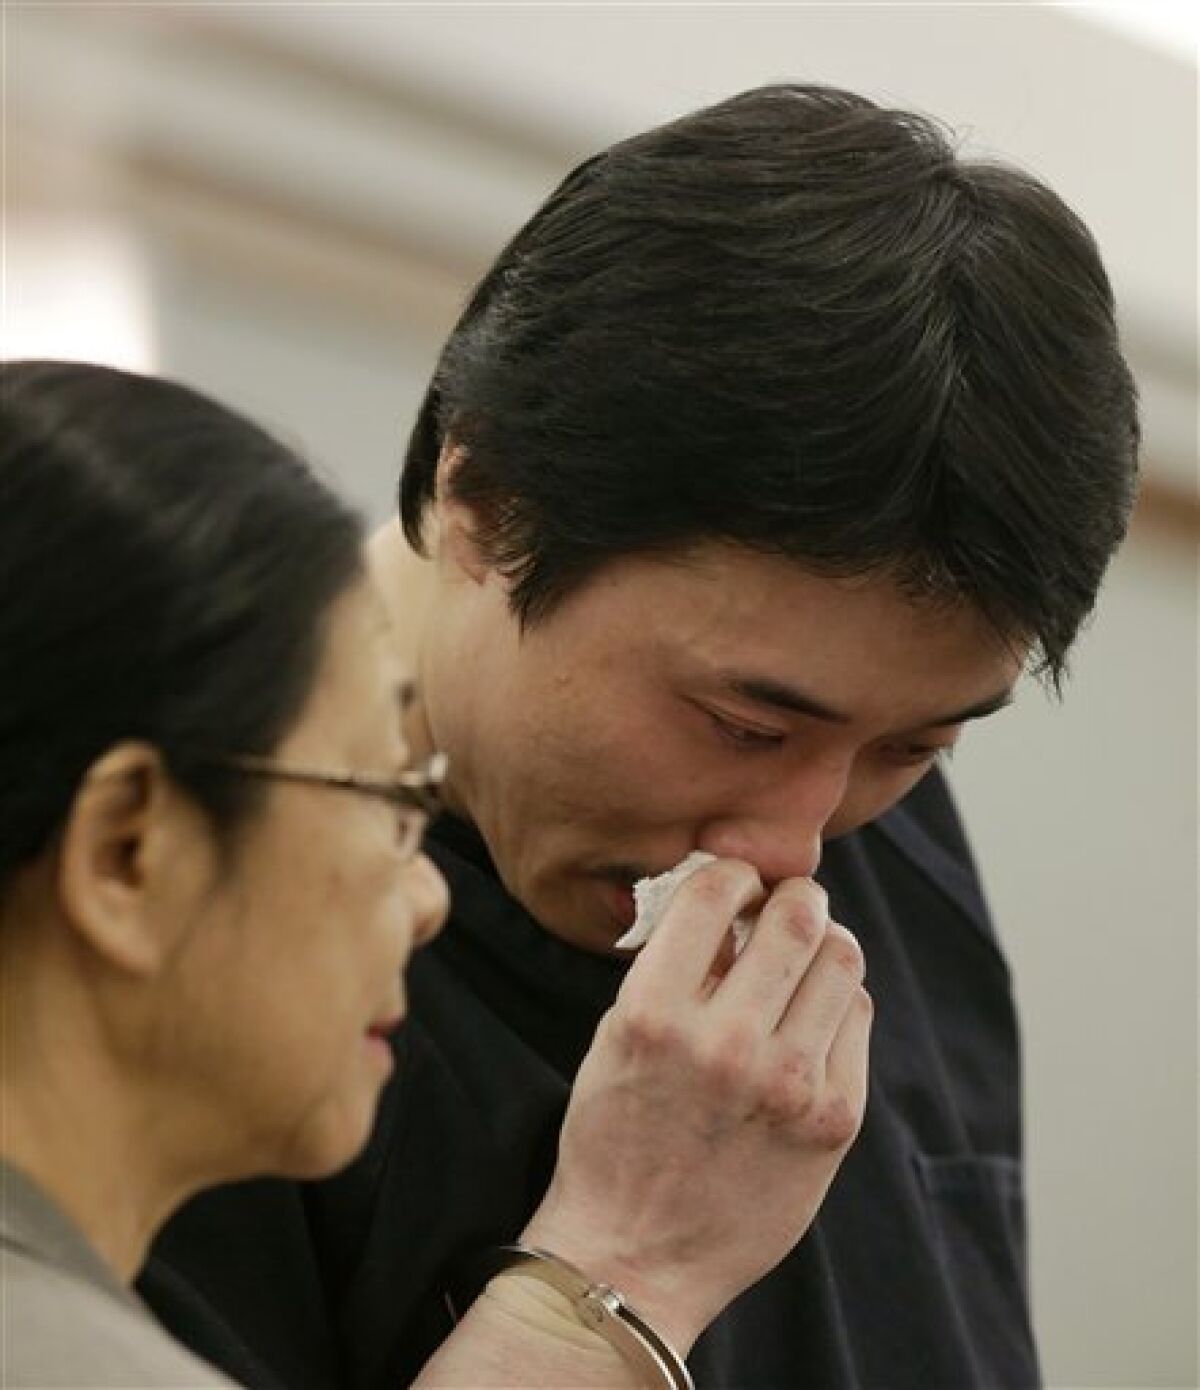 Xiao Ye Bai reacts as he reads a statement to the court during his sentencing, Tuesday, March 5, 2013, in Las Vegas. The 26-year-old Chinese immigrant, convicted of being an enforcer for a Taiwan-based criminal gang, will spend the rest of his life in a Nevada prison for killing one person and wounding two others in a bloody knife attack in a Las Vegas karaoke bar in July 2009. (AP Photo/Julie Jacobson)